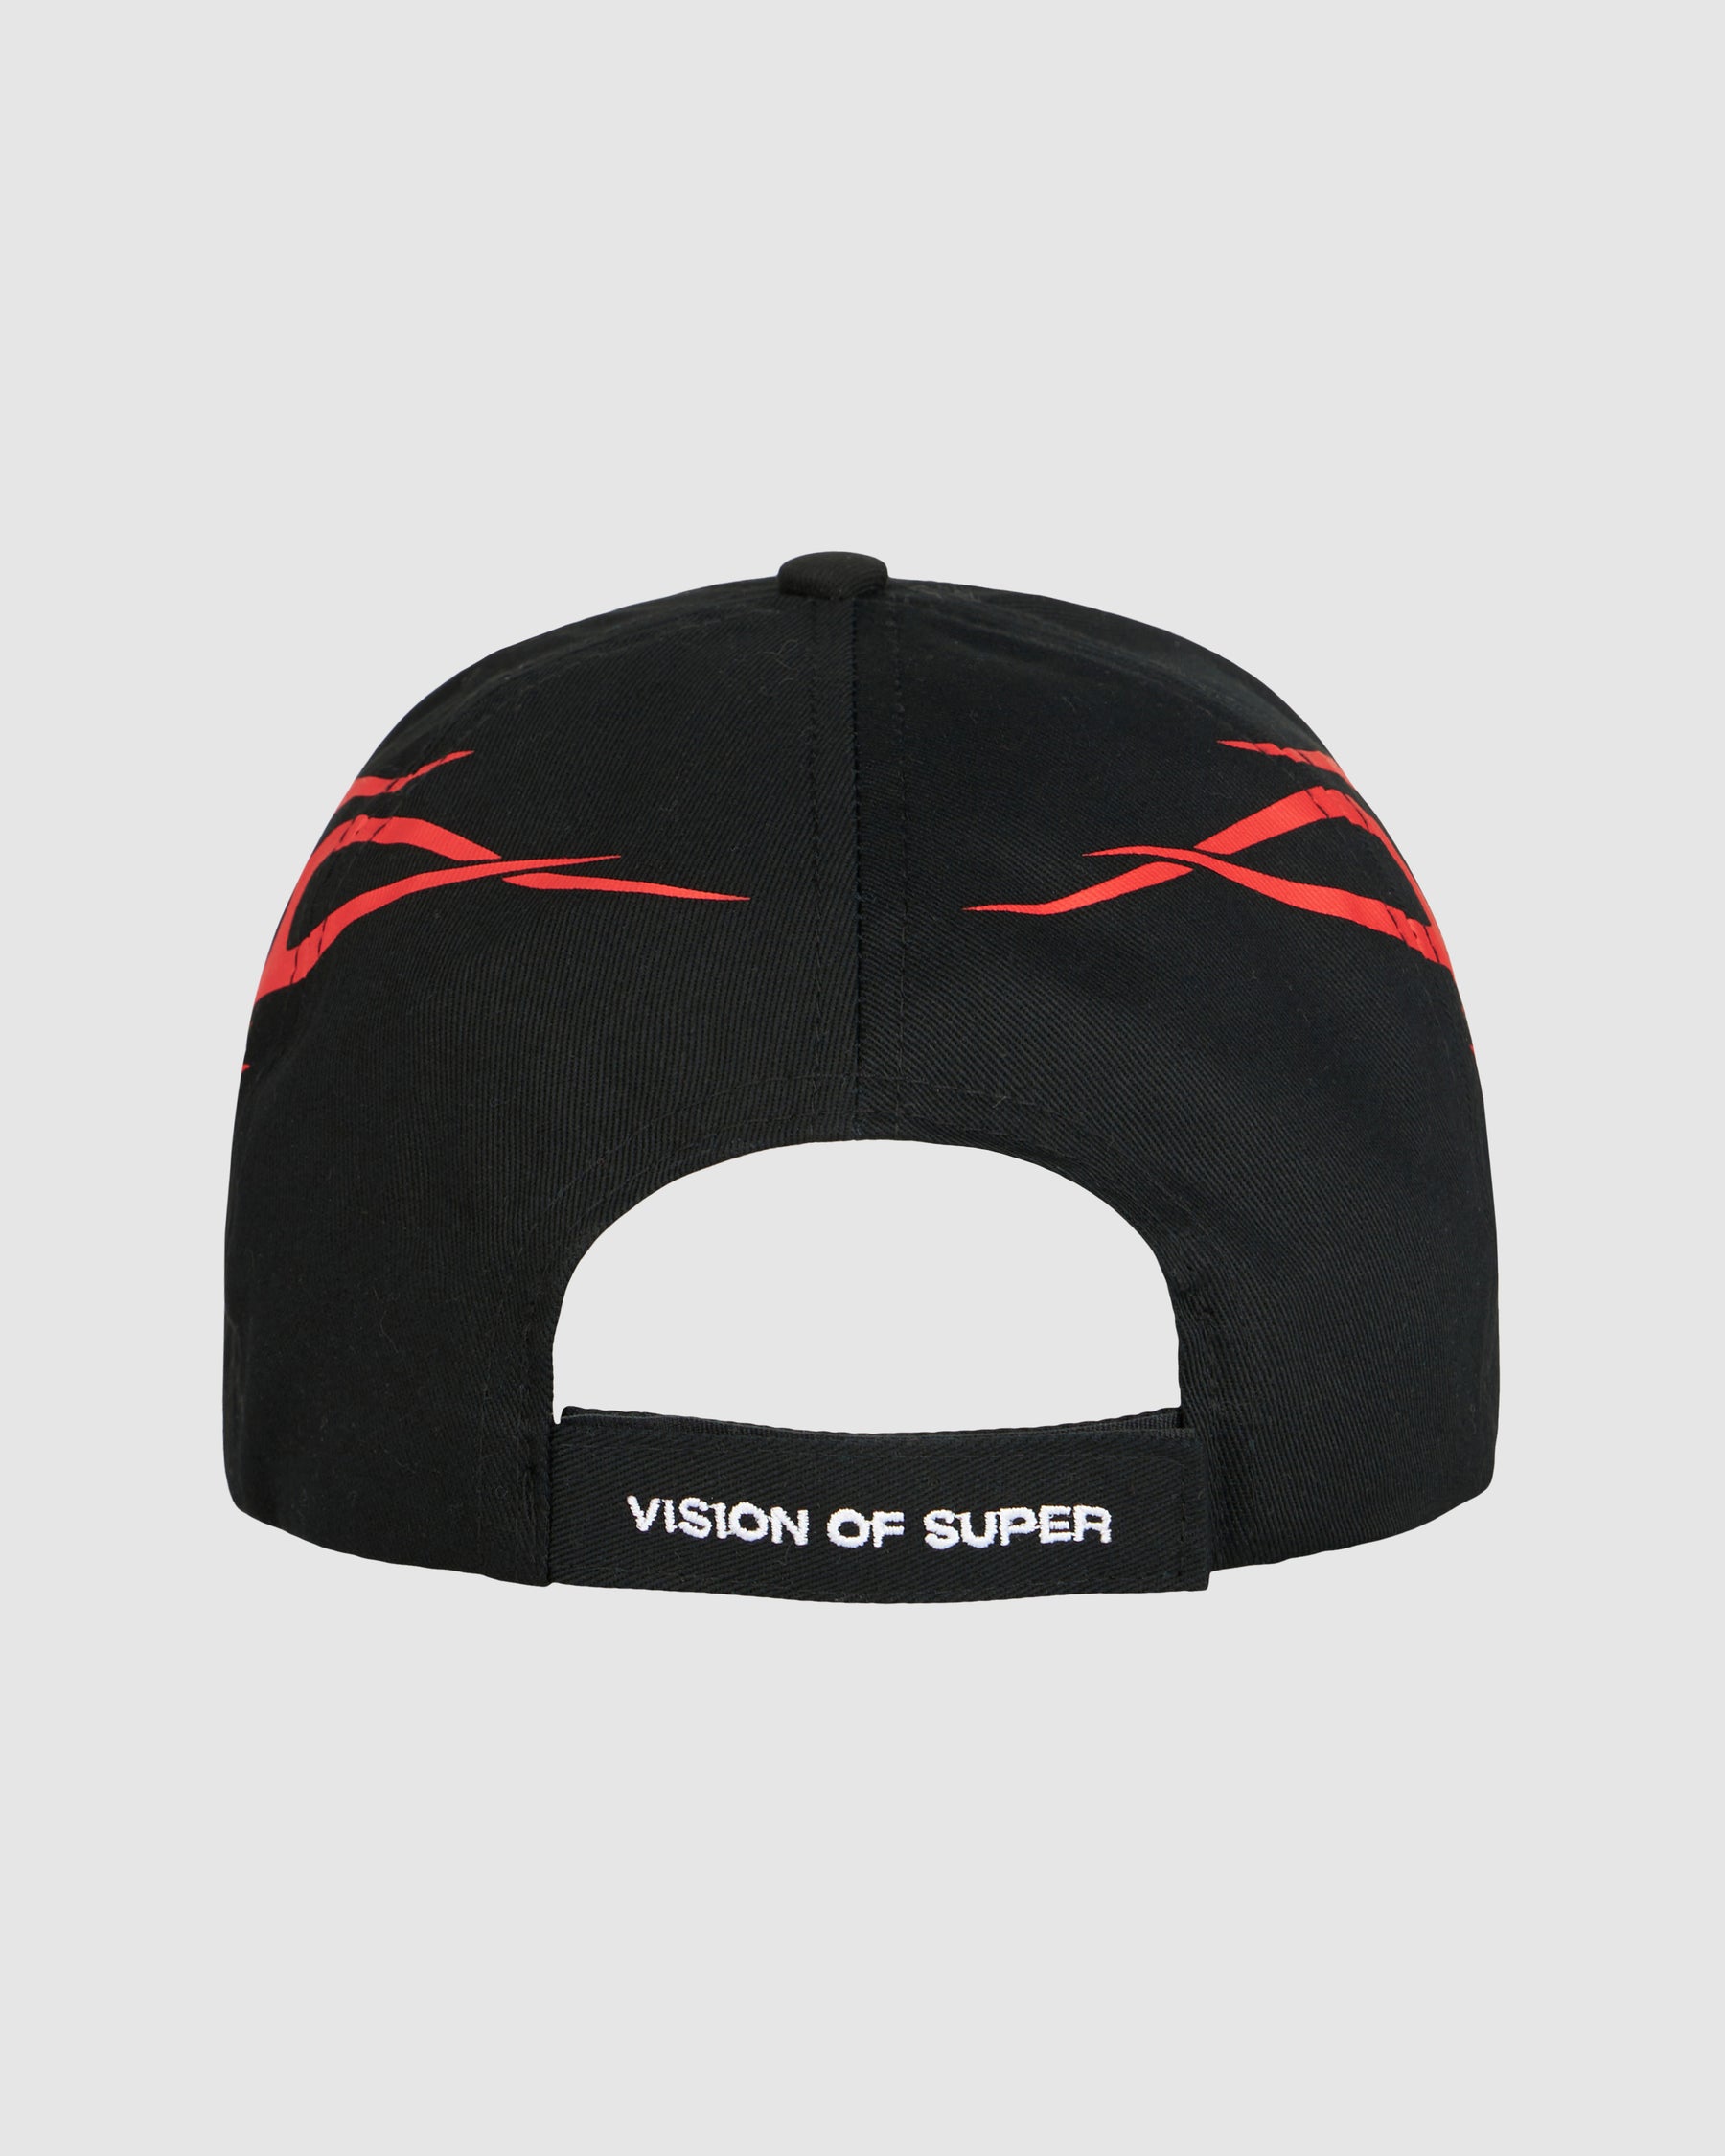 VISION OF SUPER BLACK CAP WITH RED TRIBAL PRINT